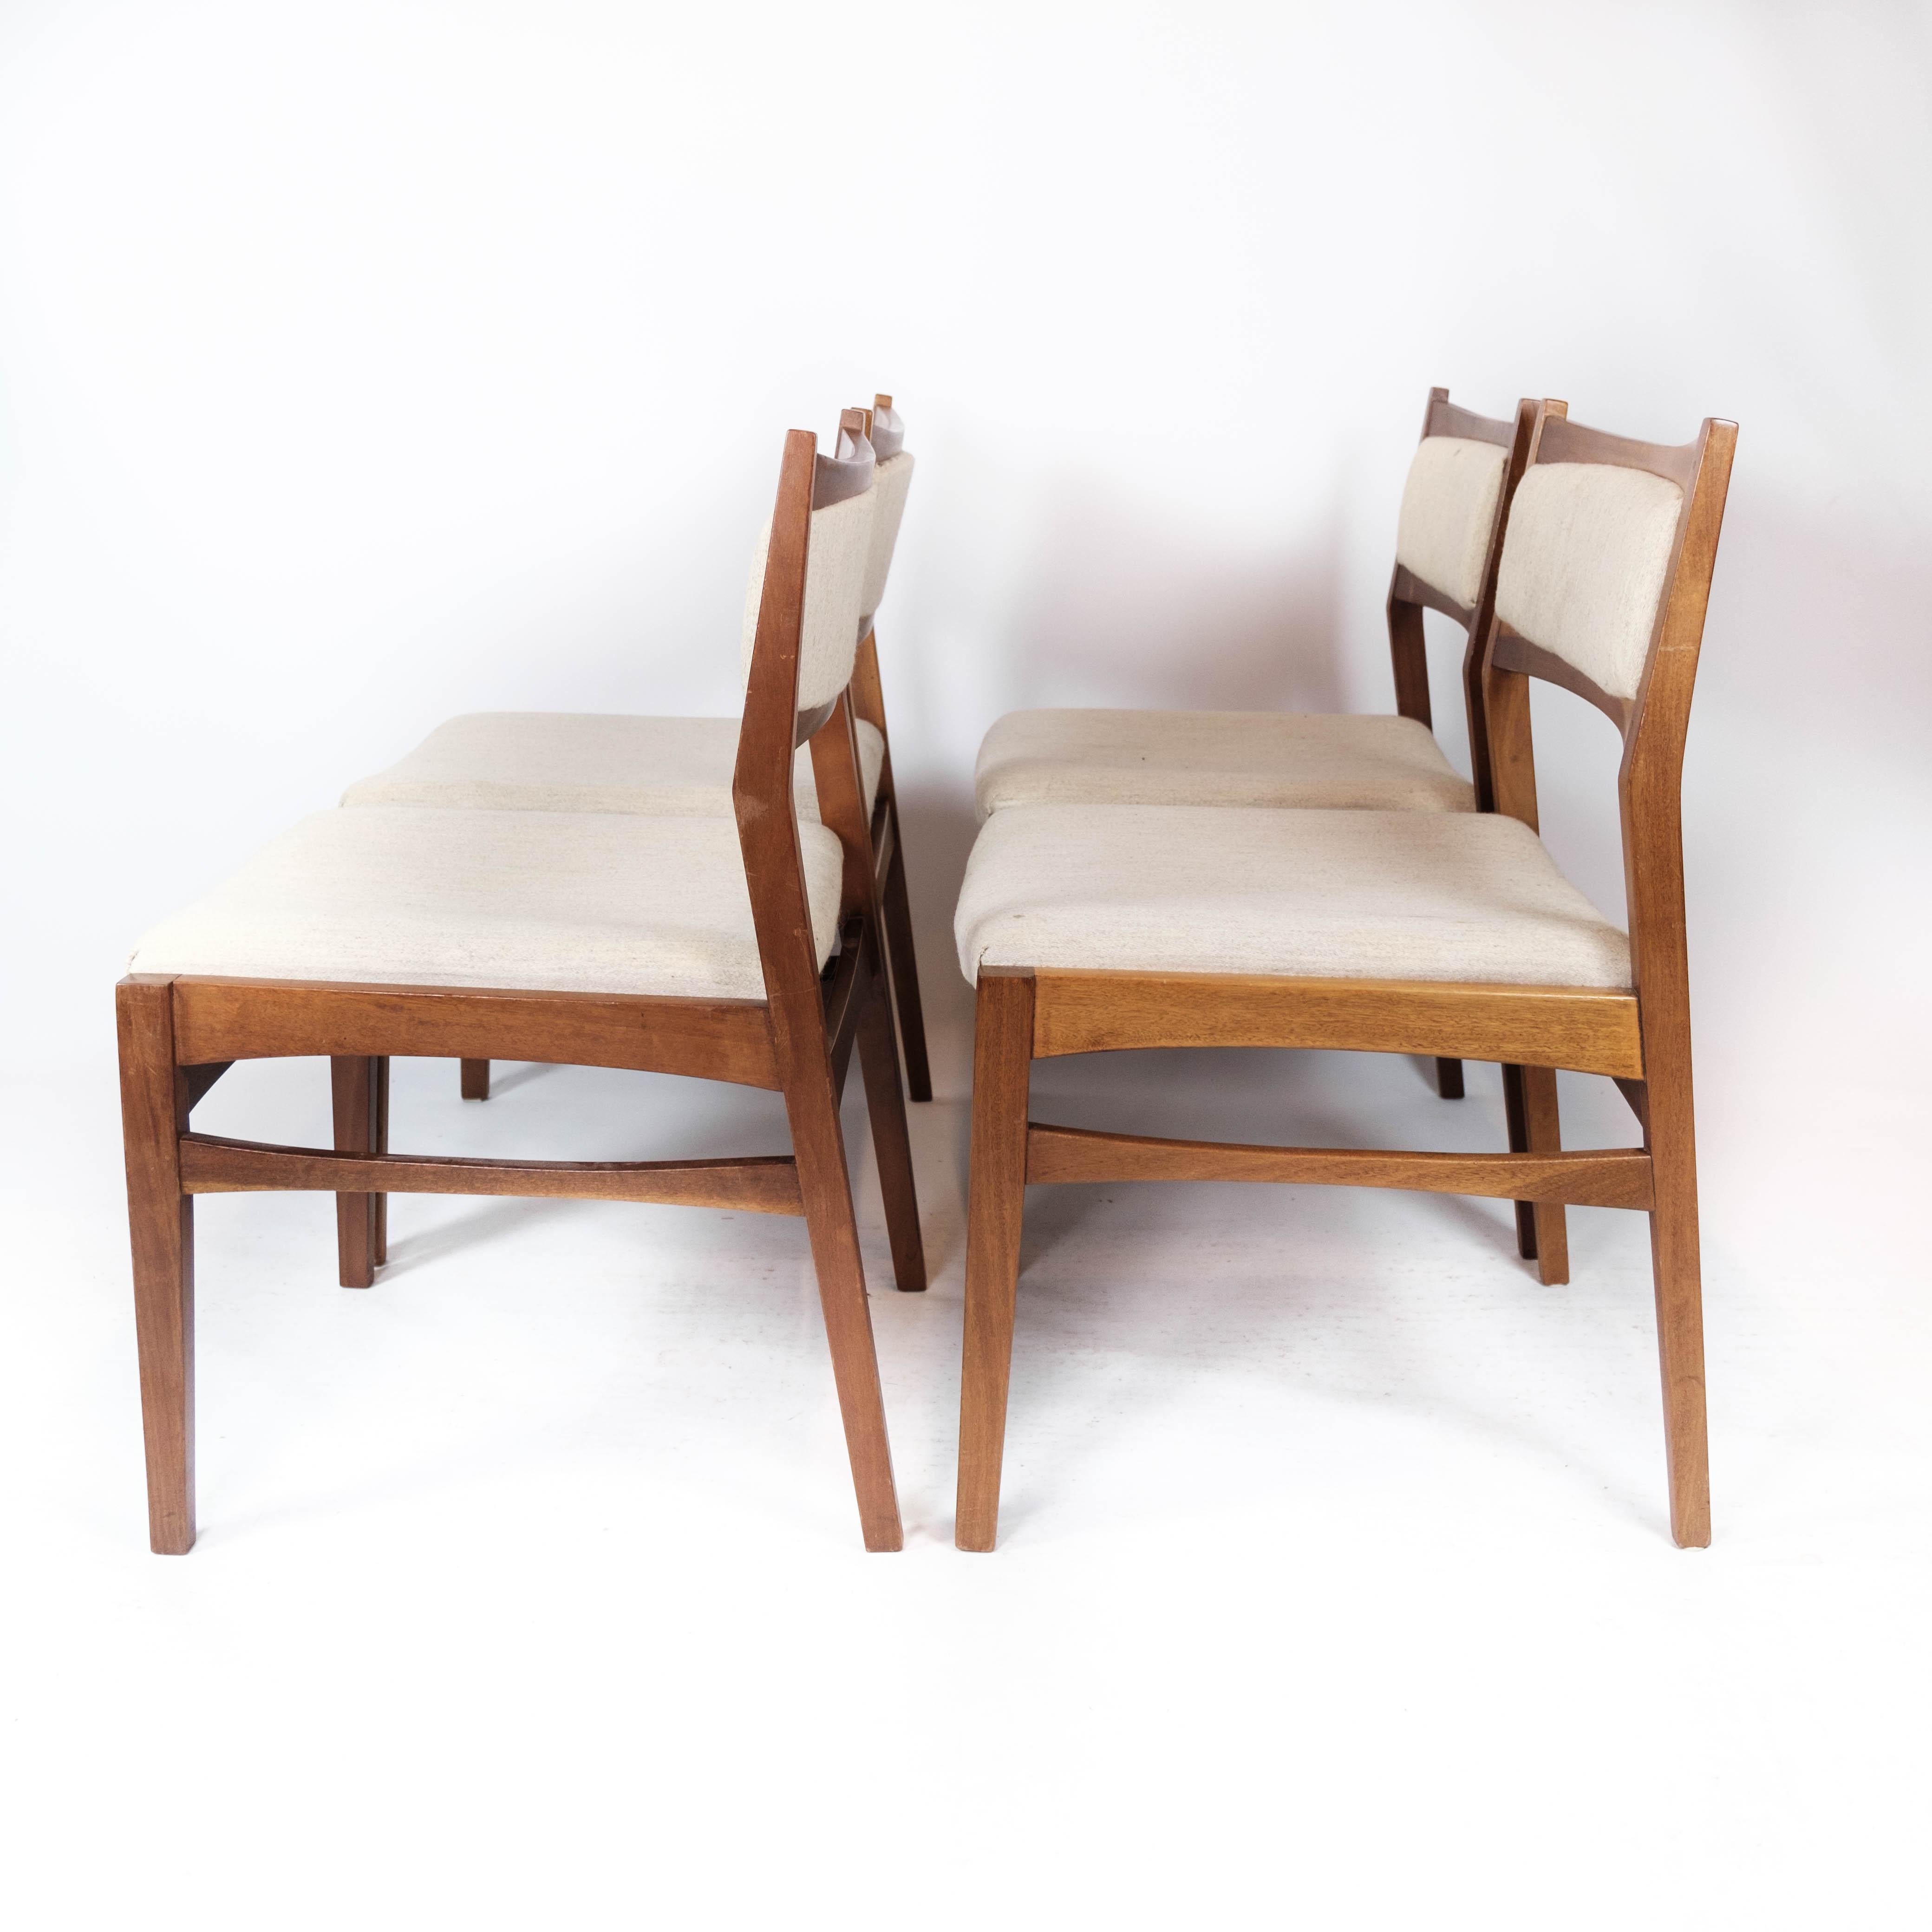 Set of Four Dining Room Chairs in Teak of Danish Design, 1960s 4